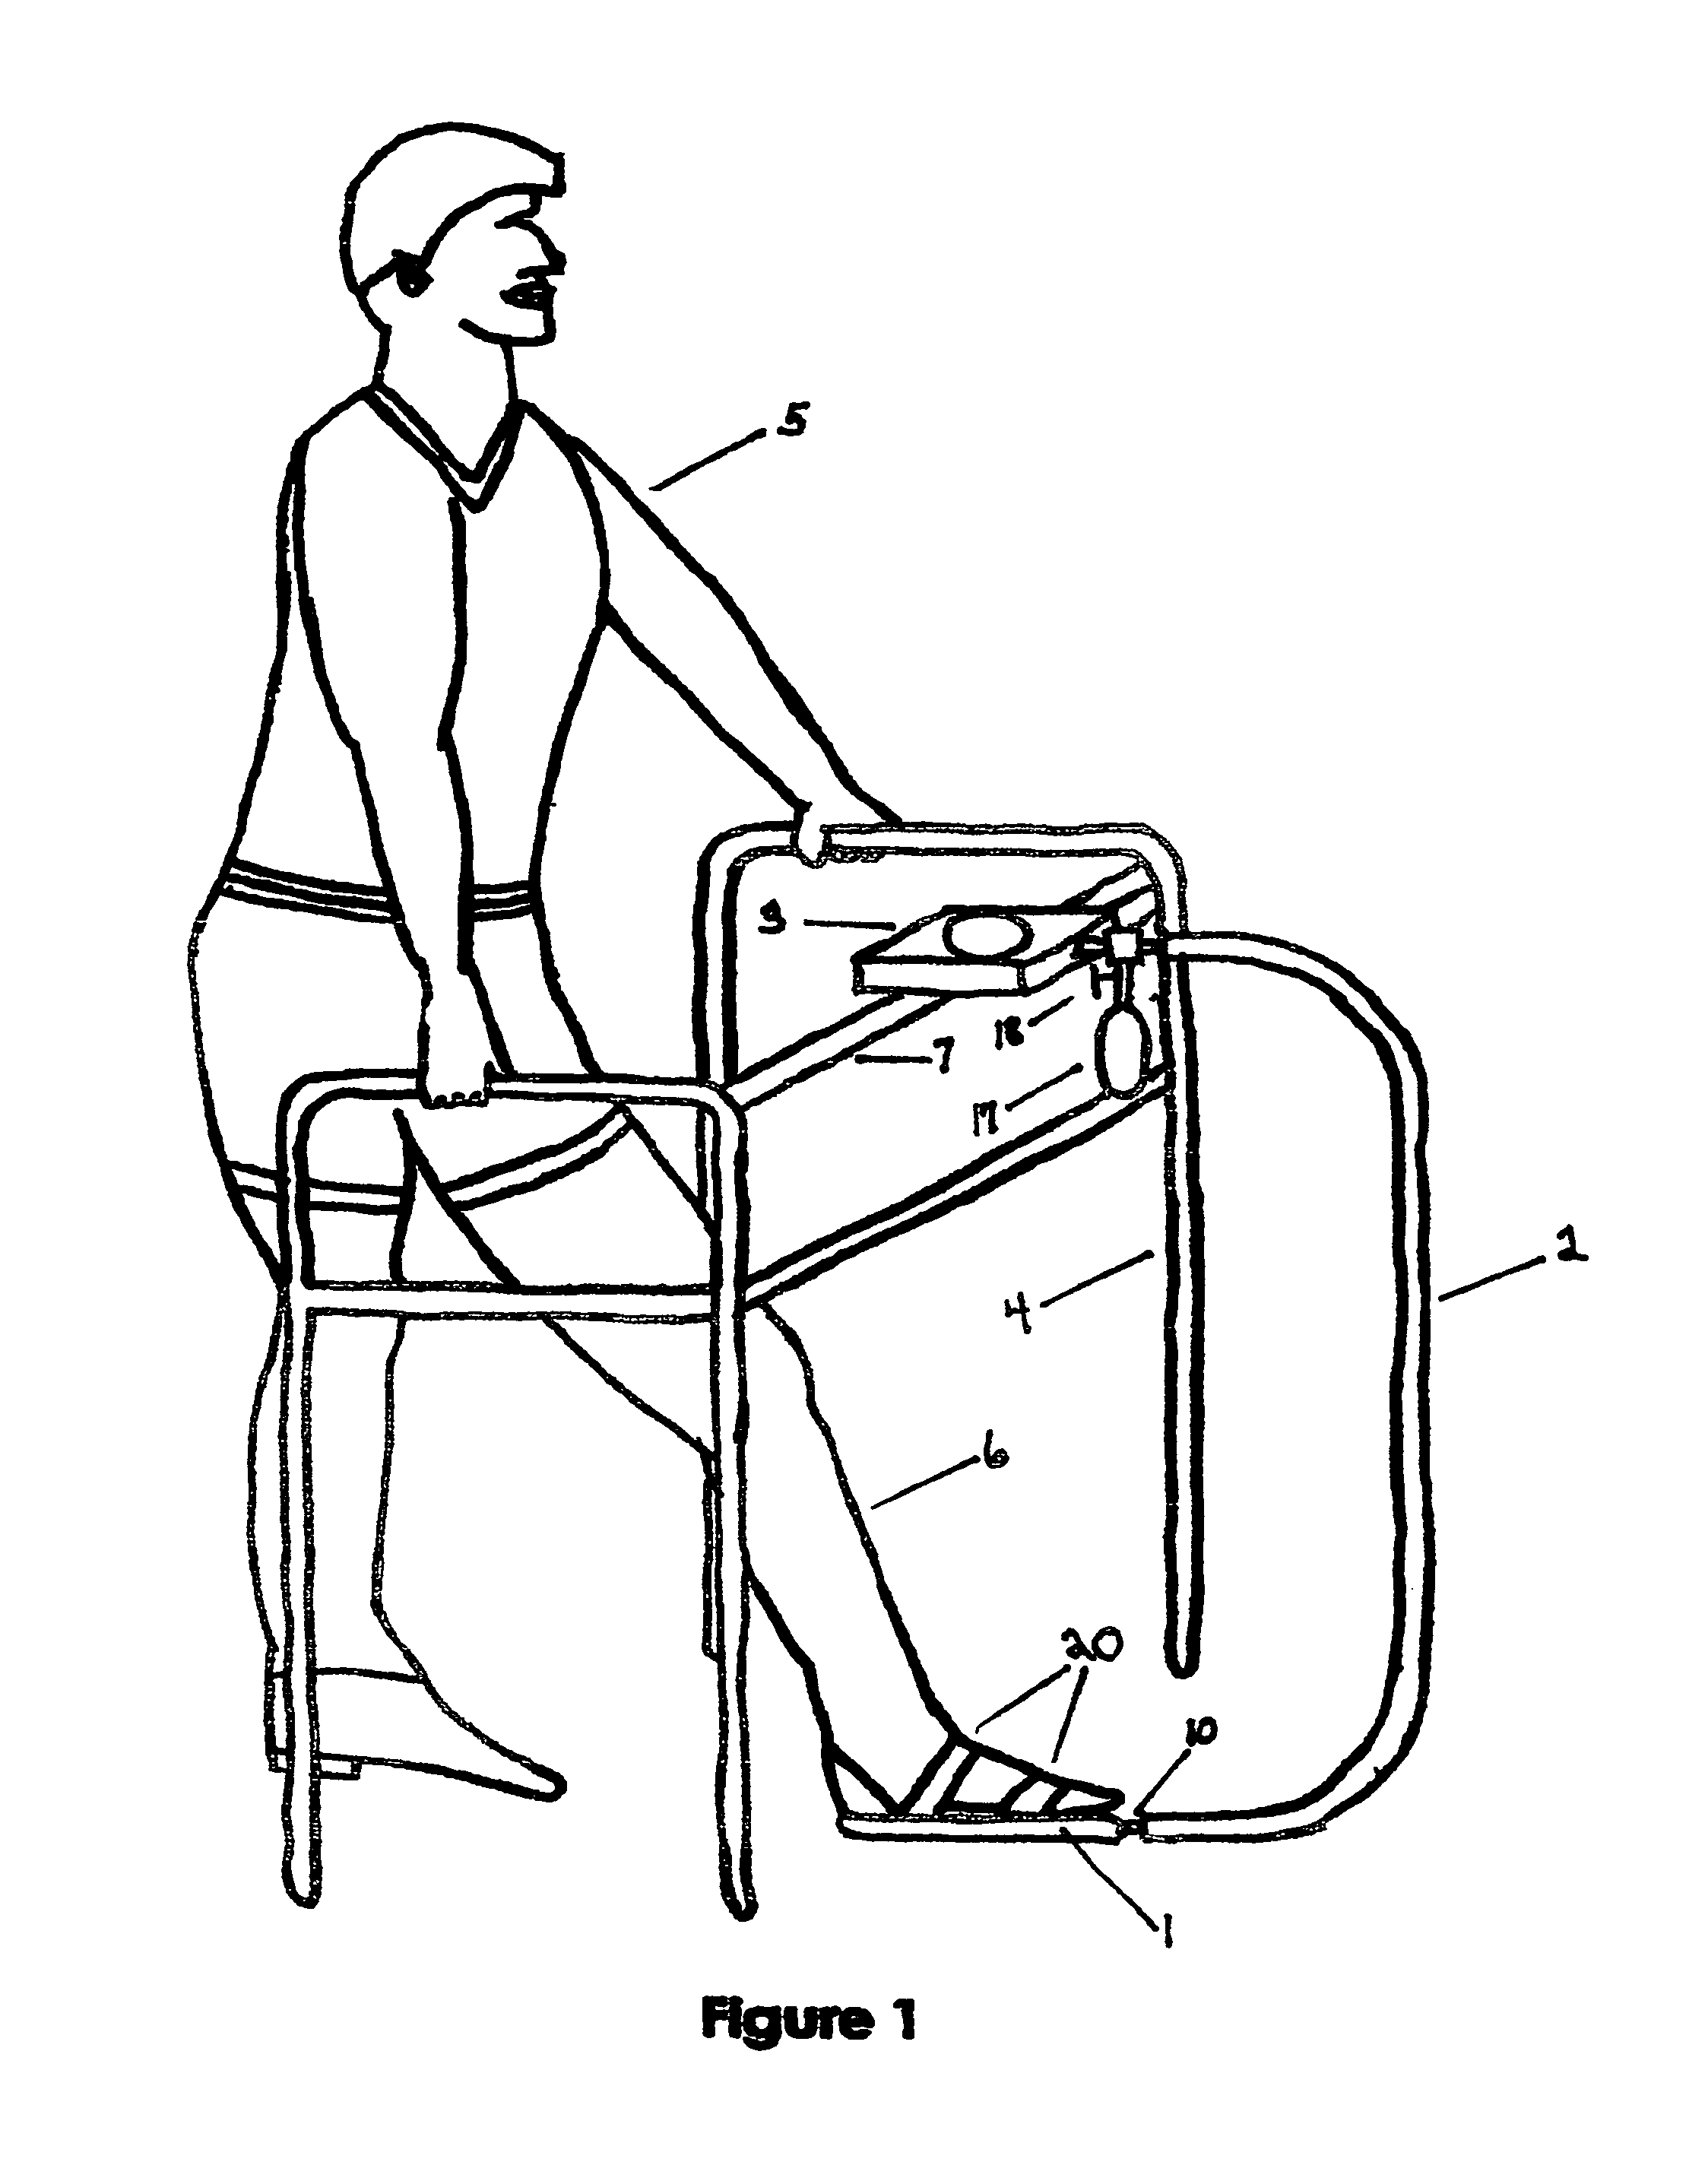 Visual warning device for weight bearing